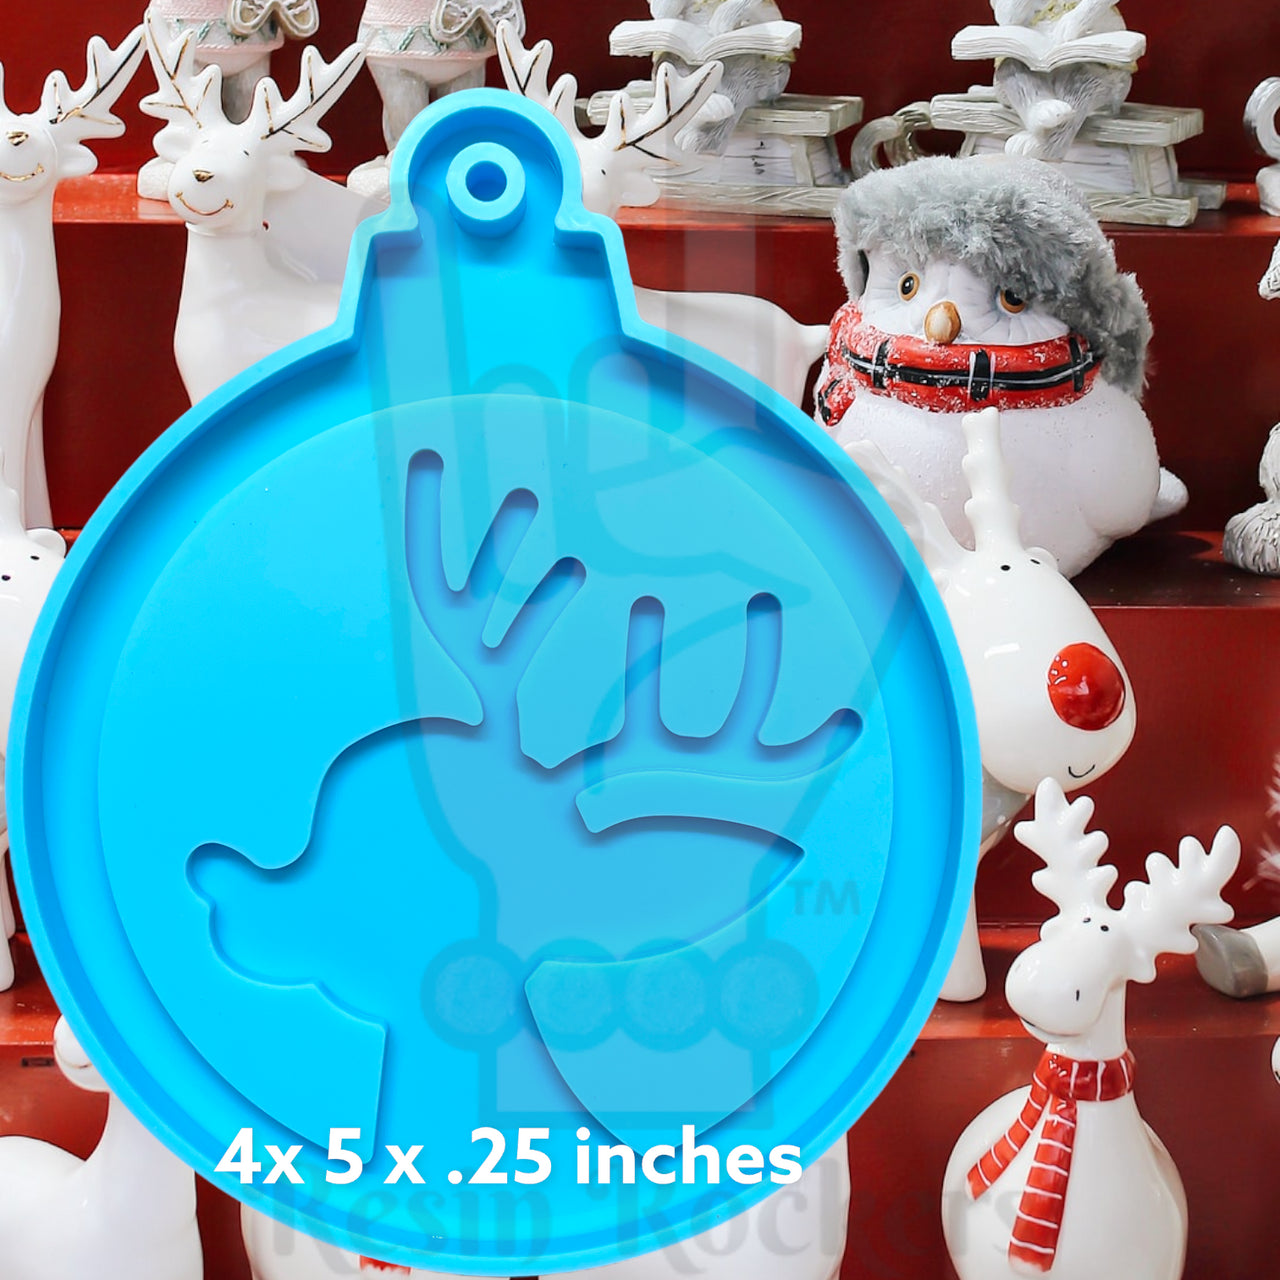 JUMBO Rudolph the Red-nosed Reindeer Inspired Holiday Ornament Silicone Mold for Epoxy Resin Art